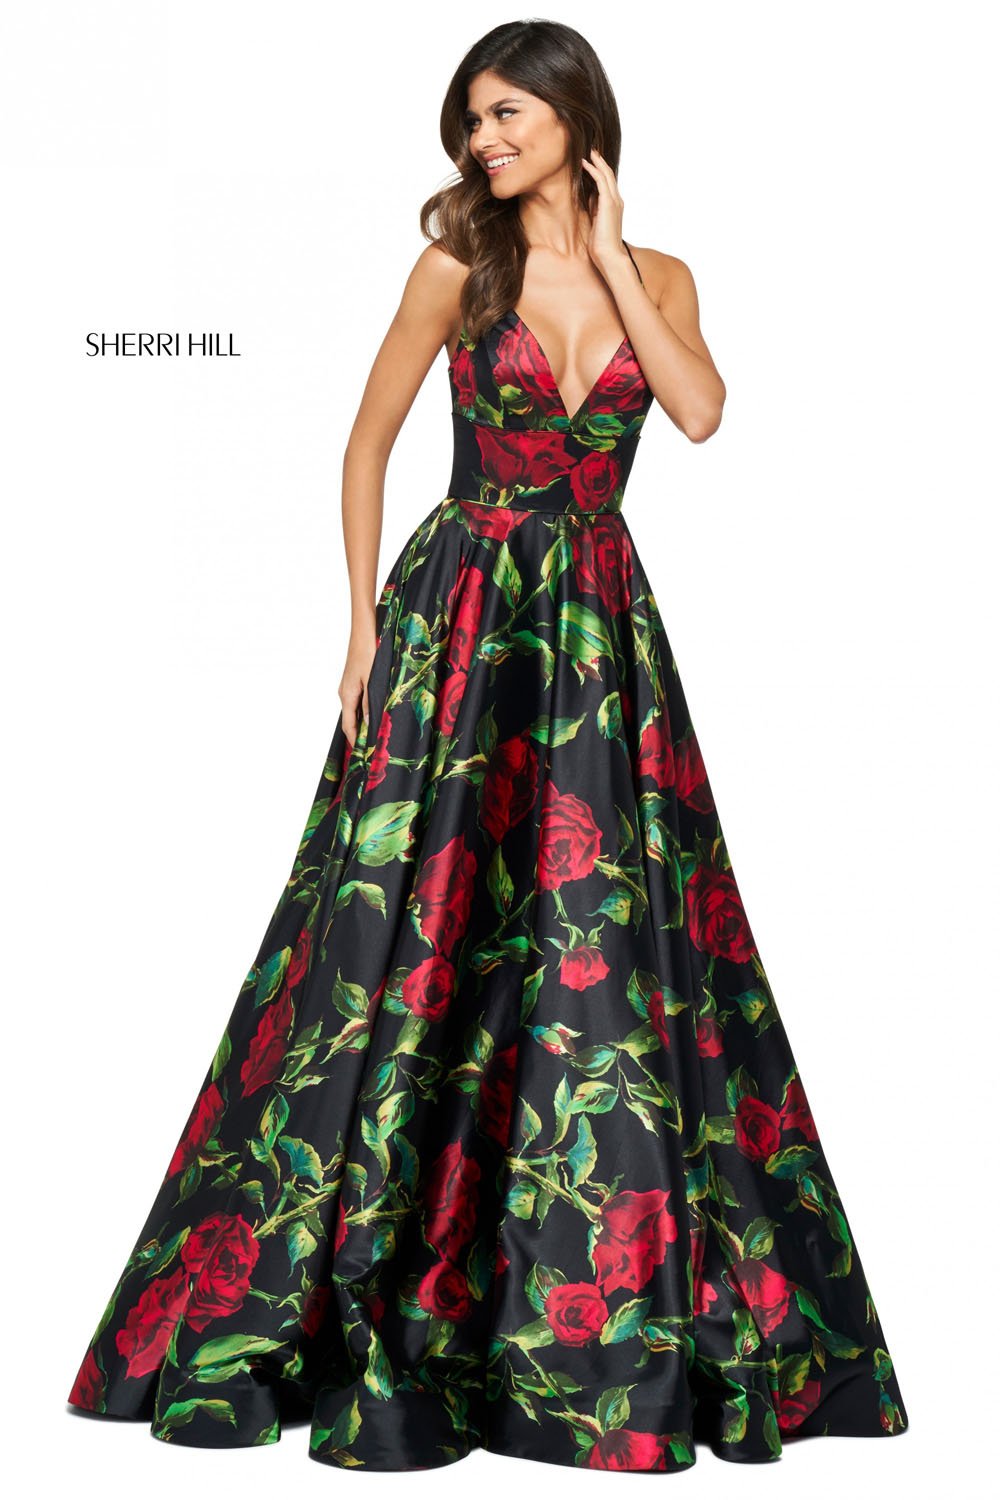 Sherri Hill 53896 dress images in these colors: Black Red Print.